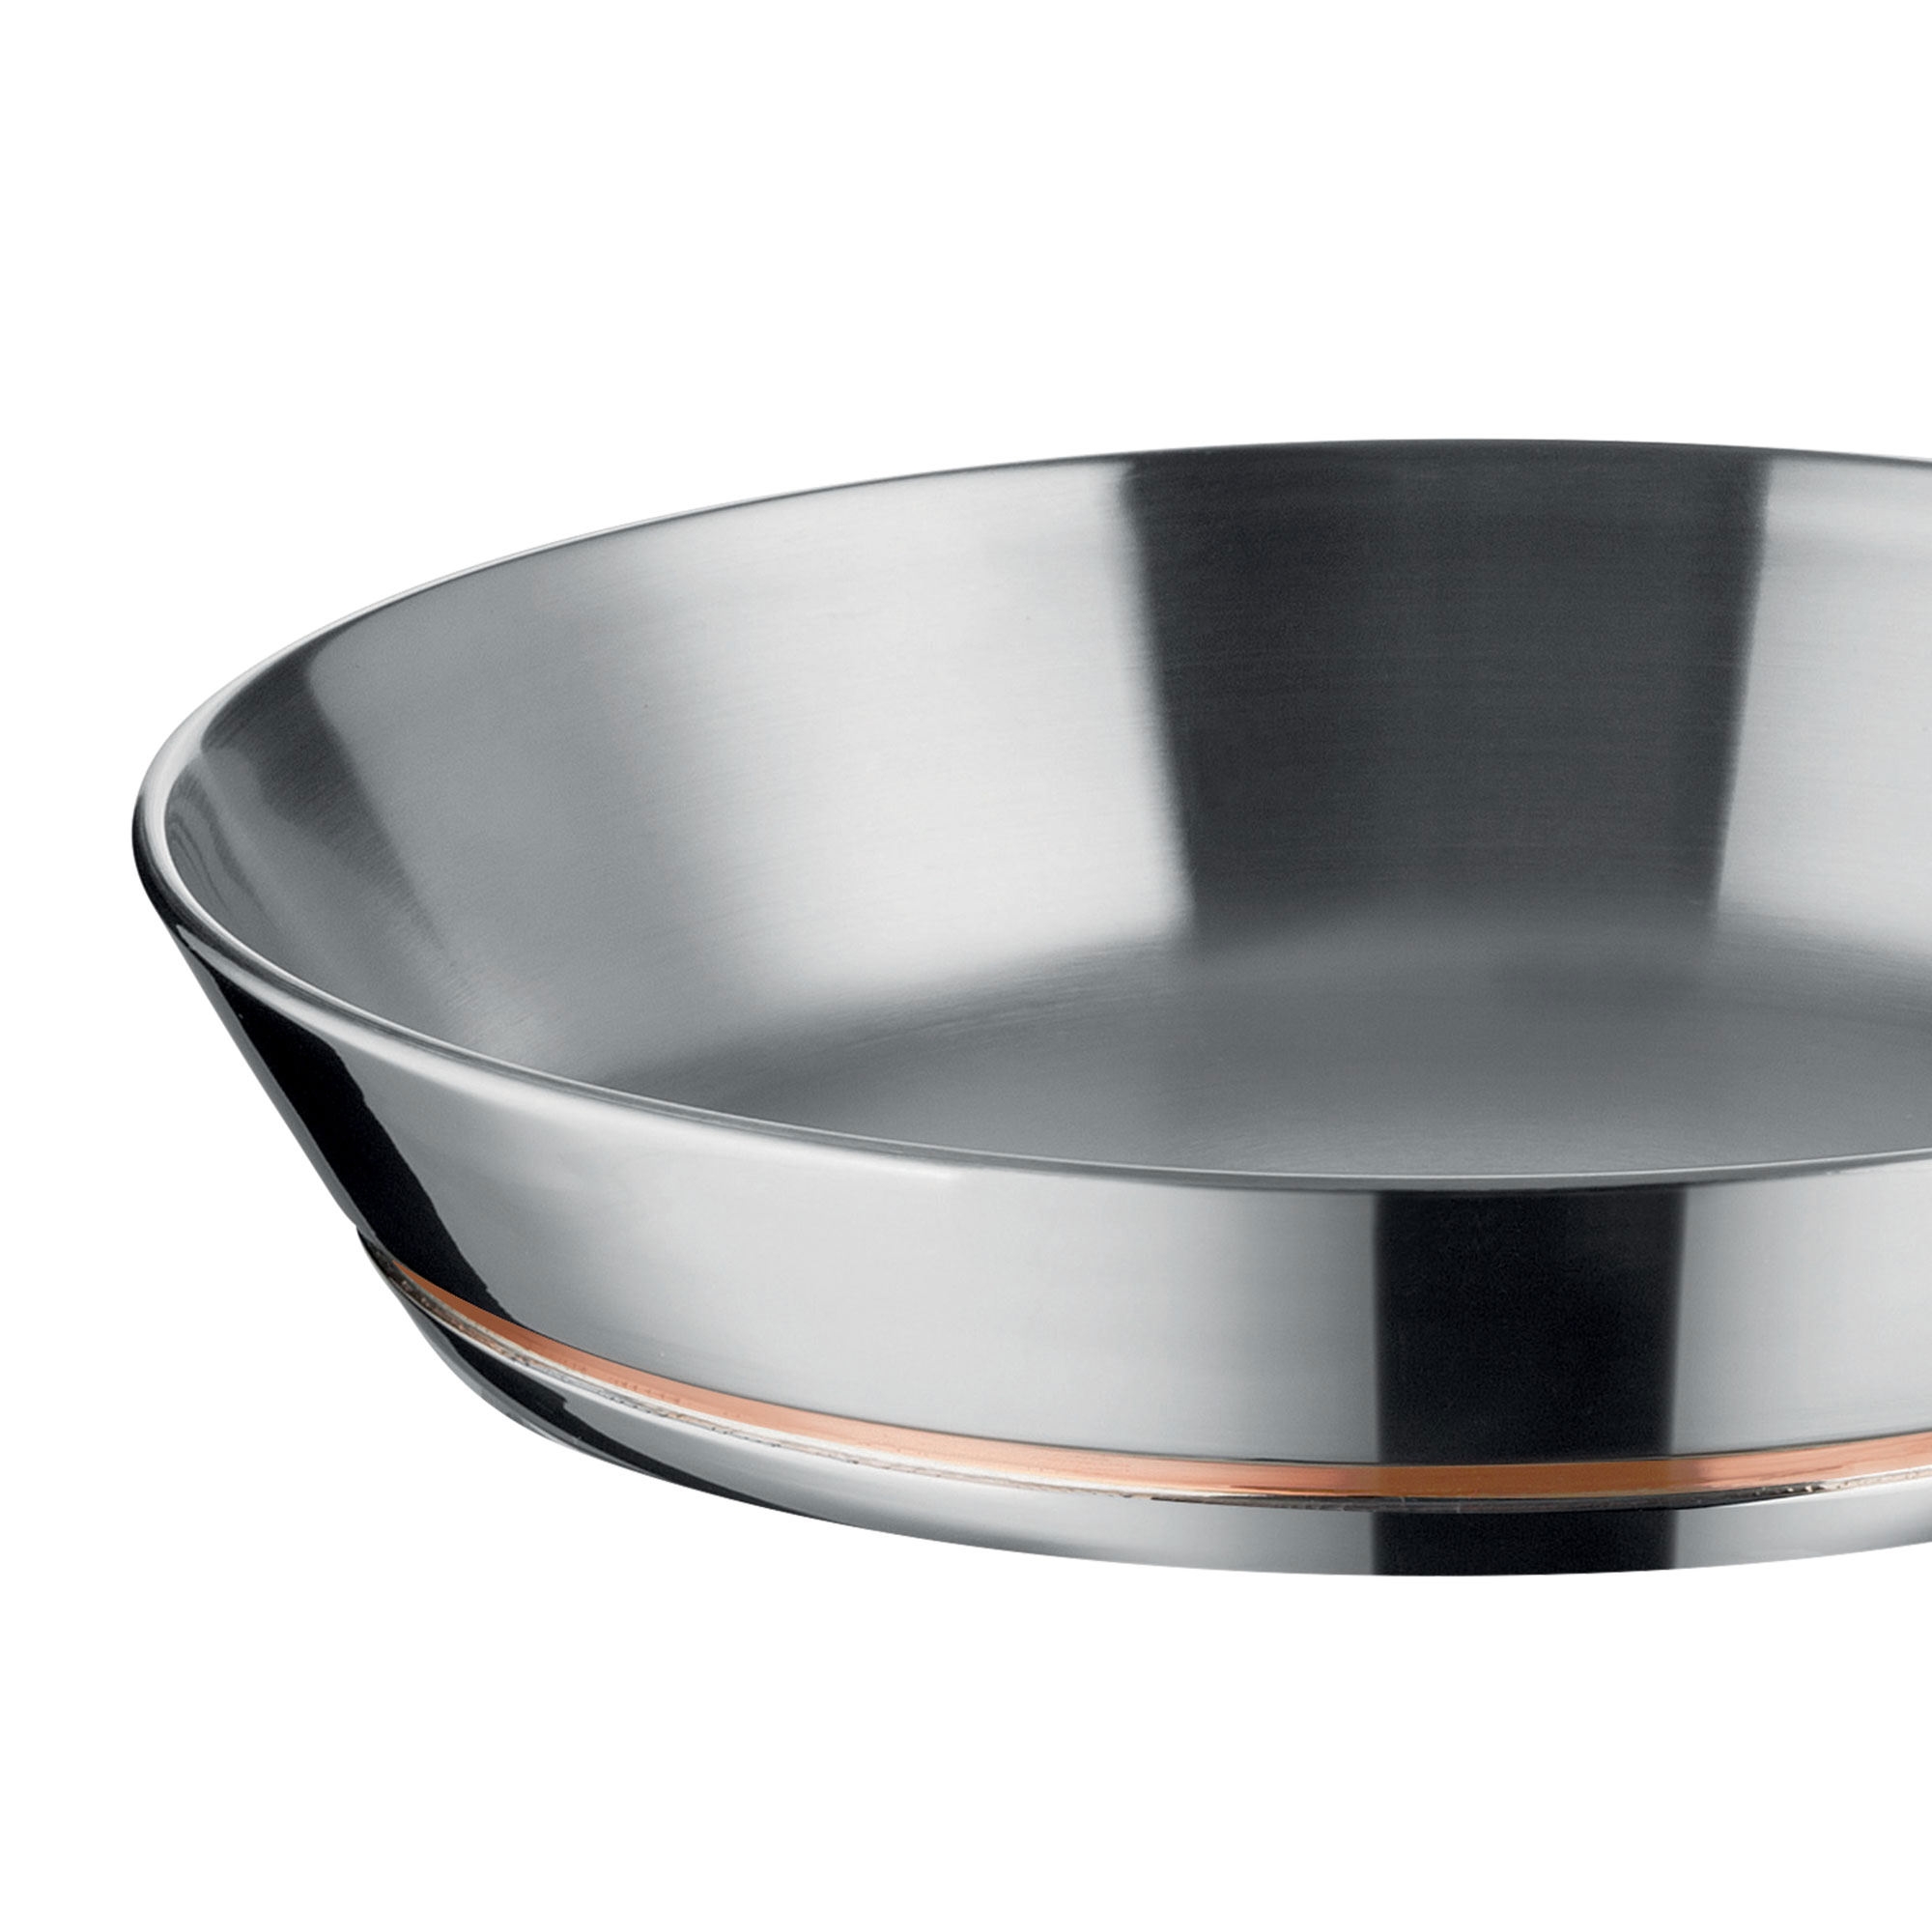 Scanpan Axis Stainless Steel Frypan 20cm Image 2